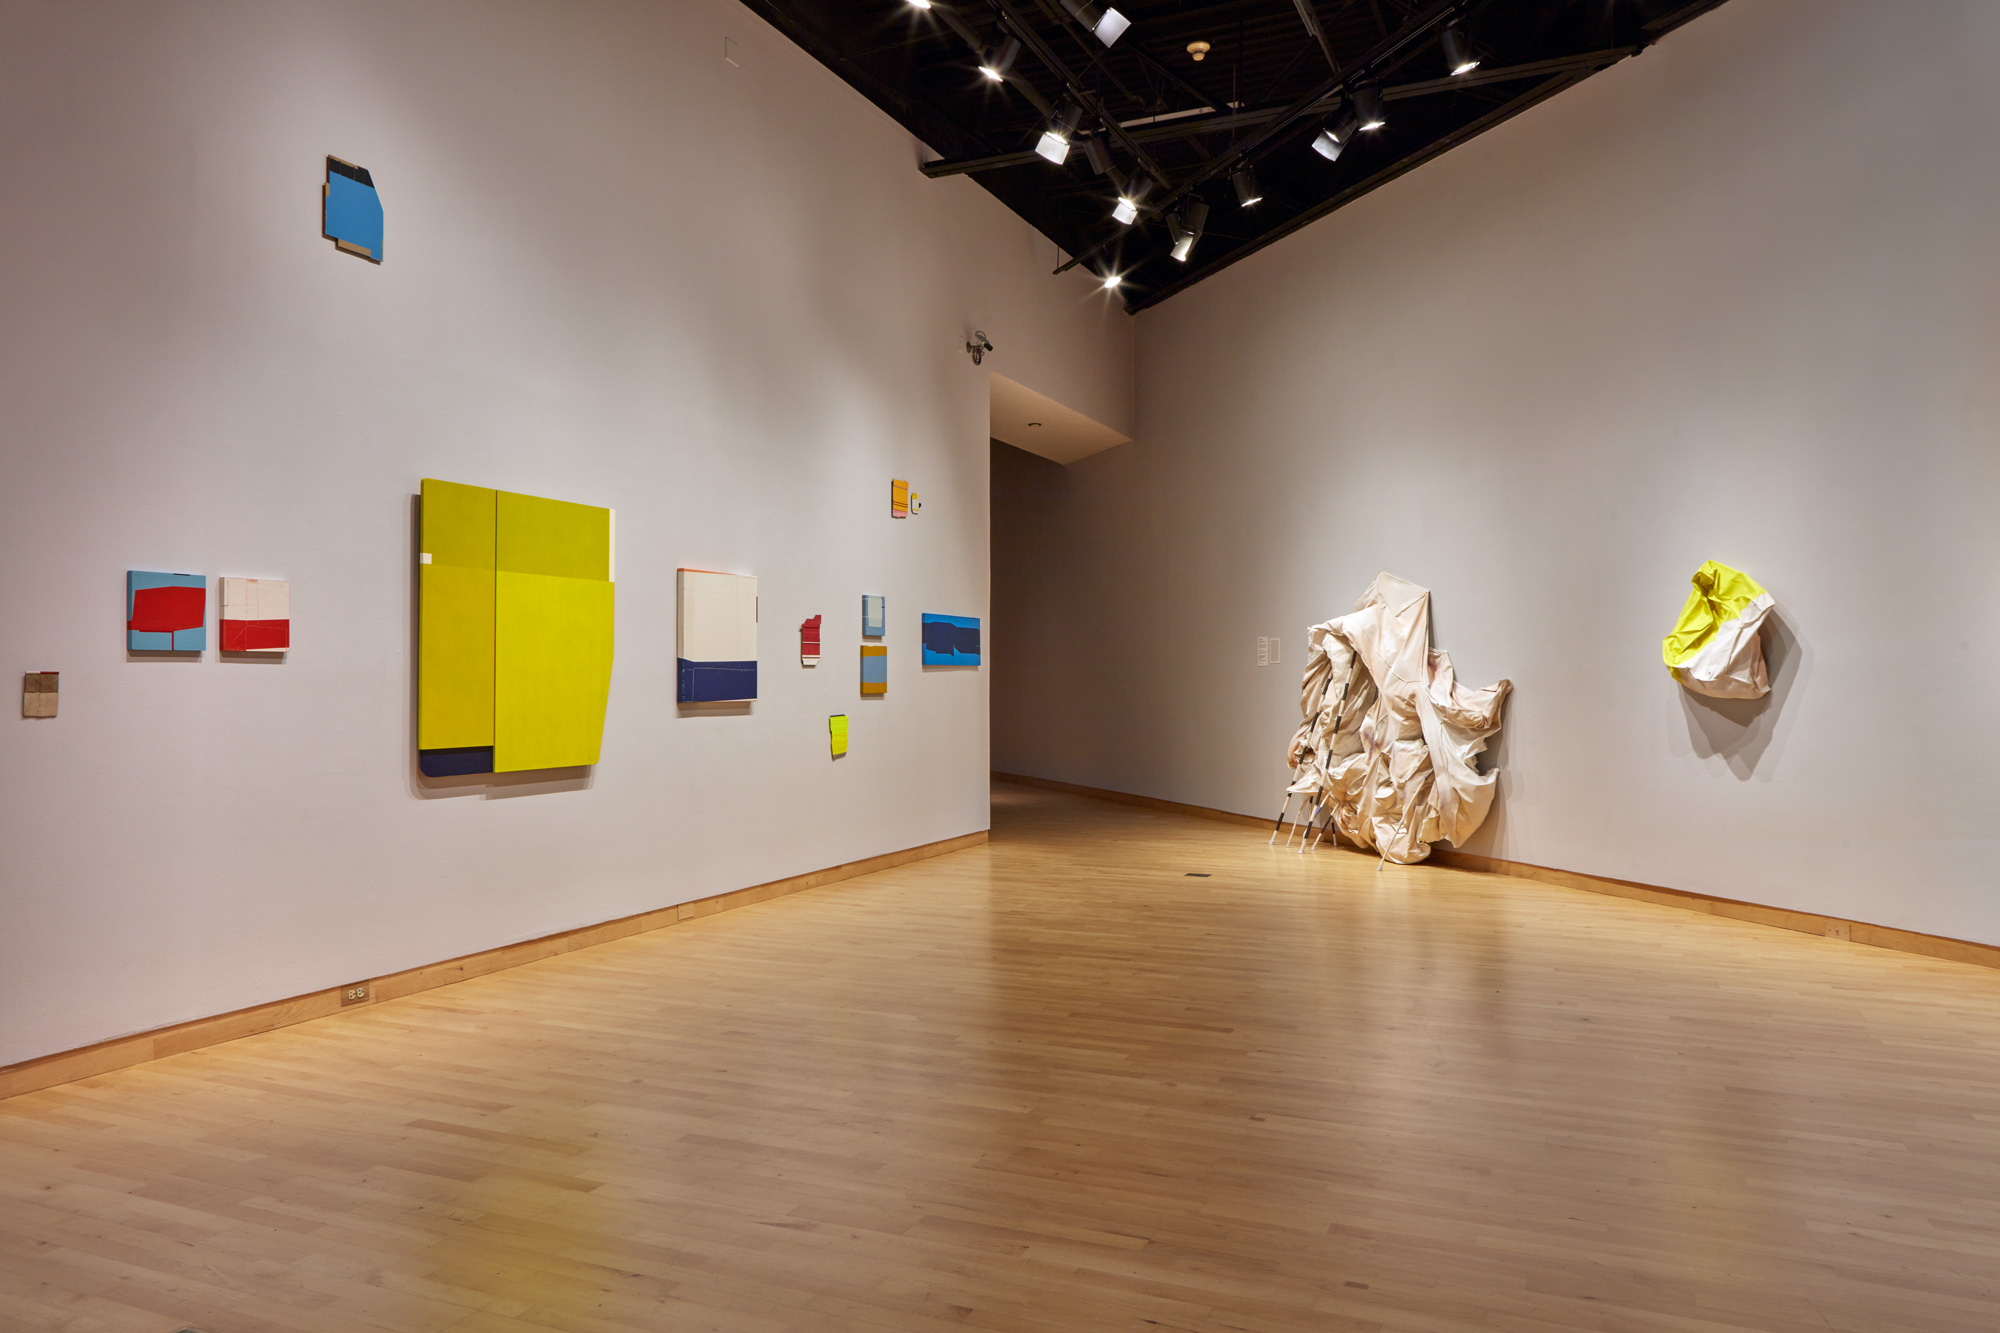 Installation view of Skyway 20/21 exhibition at USF Contemporary Art Museum. Left to right: works by Babette Herschberger and Cynthia Mason. Photo: Will Lytch.